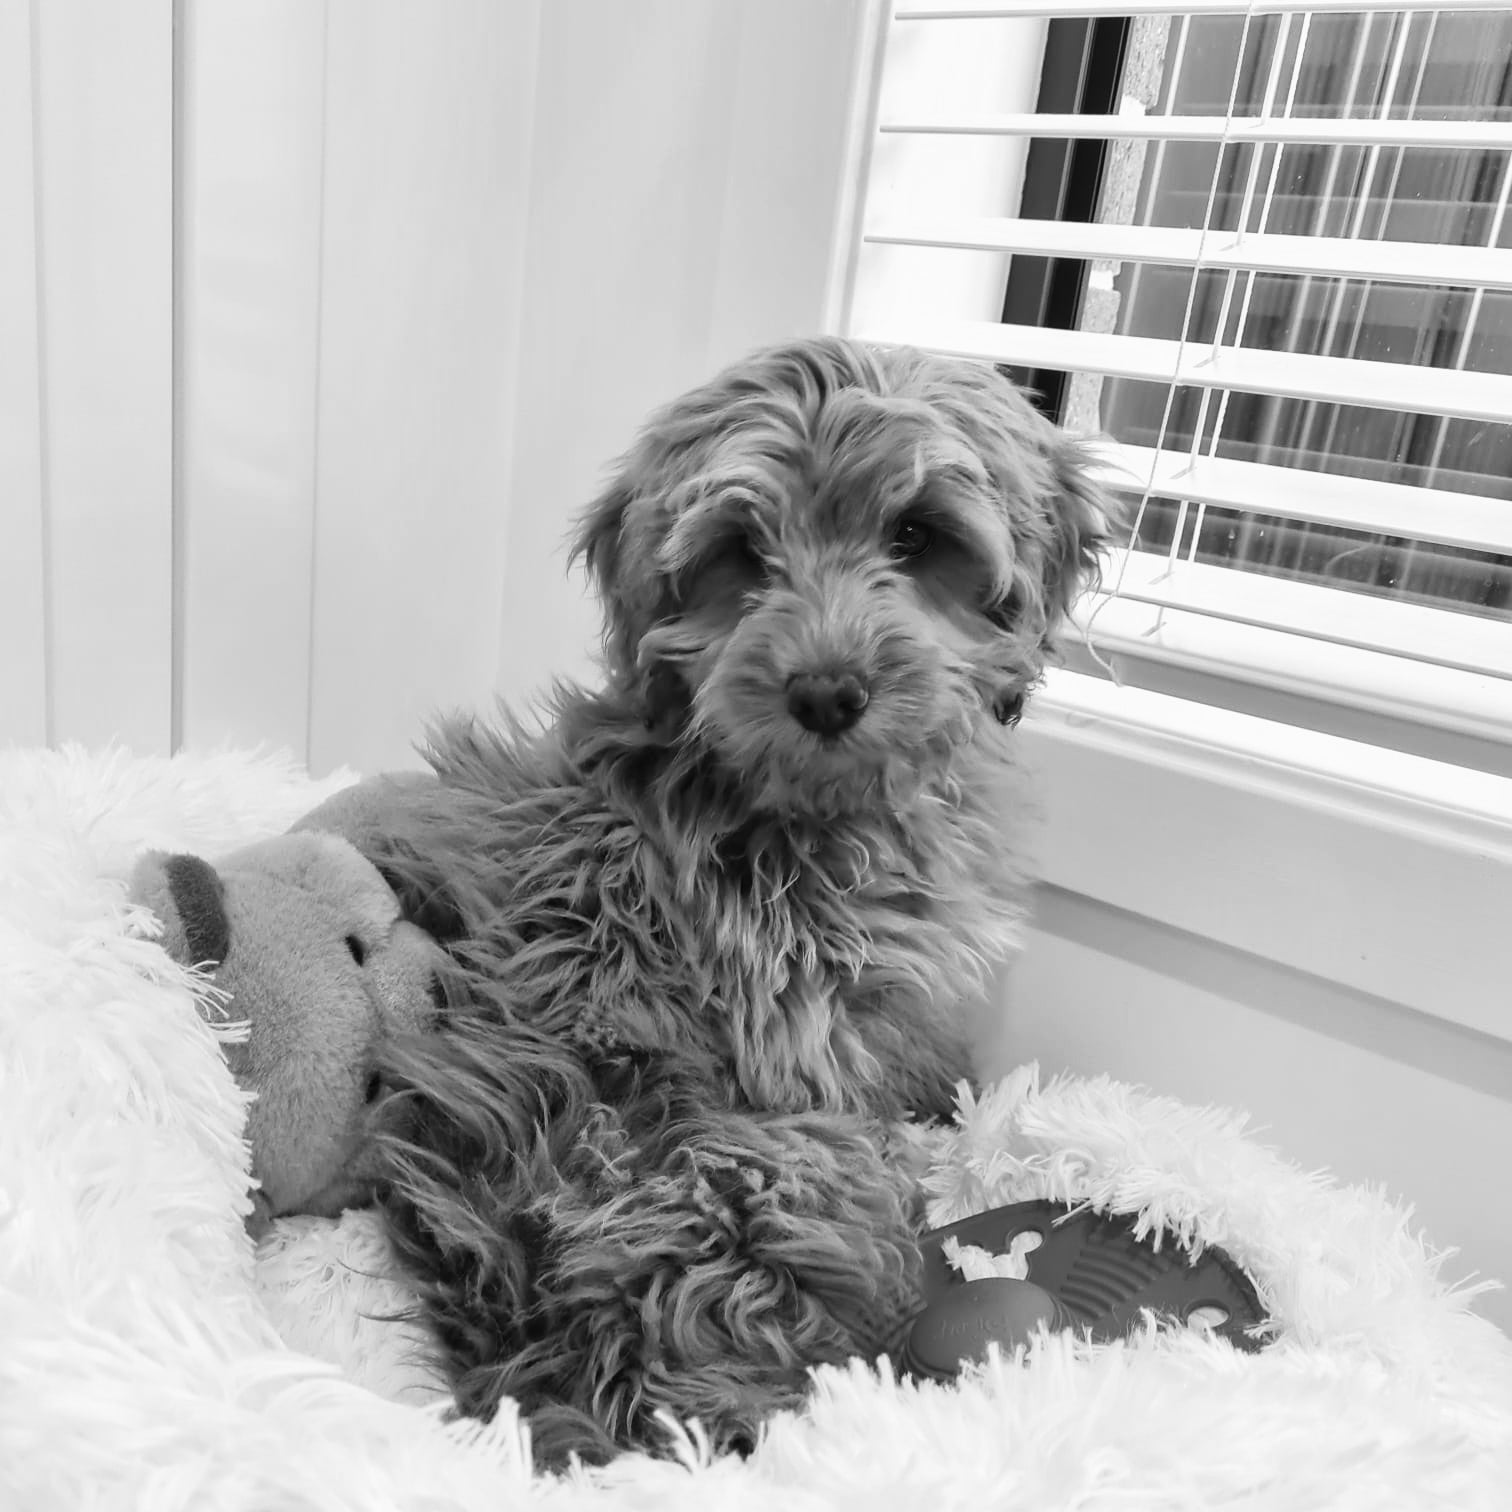 3 questions for you and your family to agree on before buying a cavoodle puppy